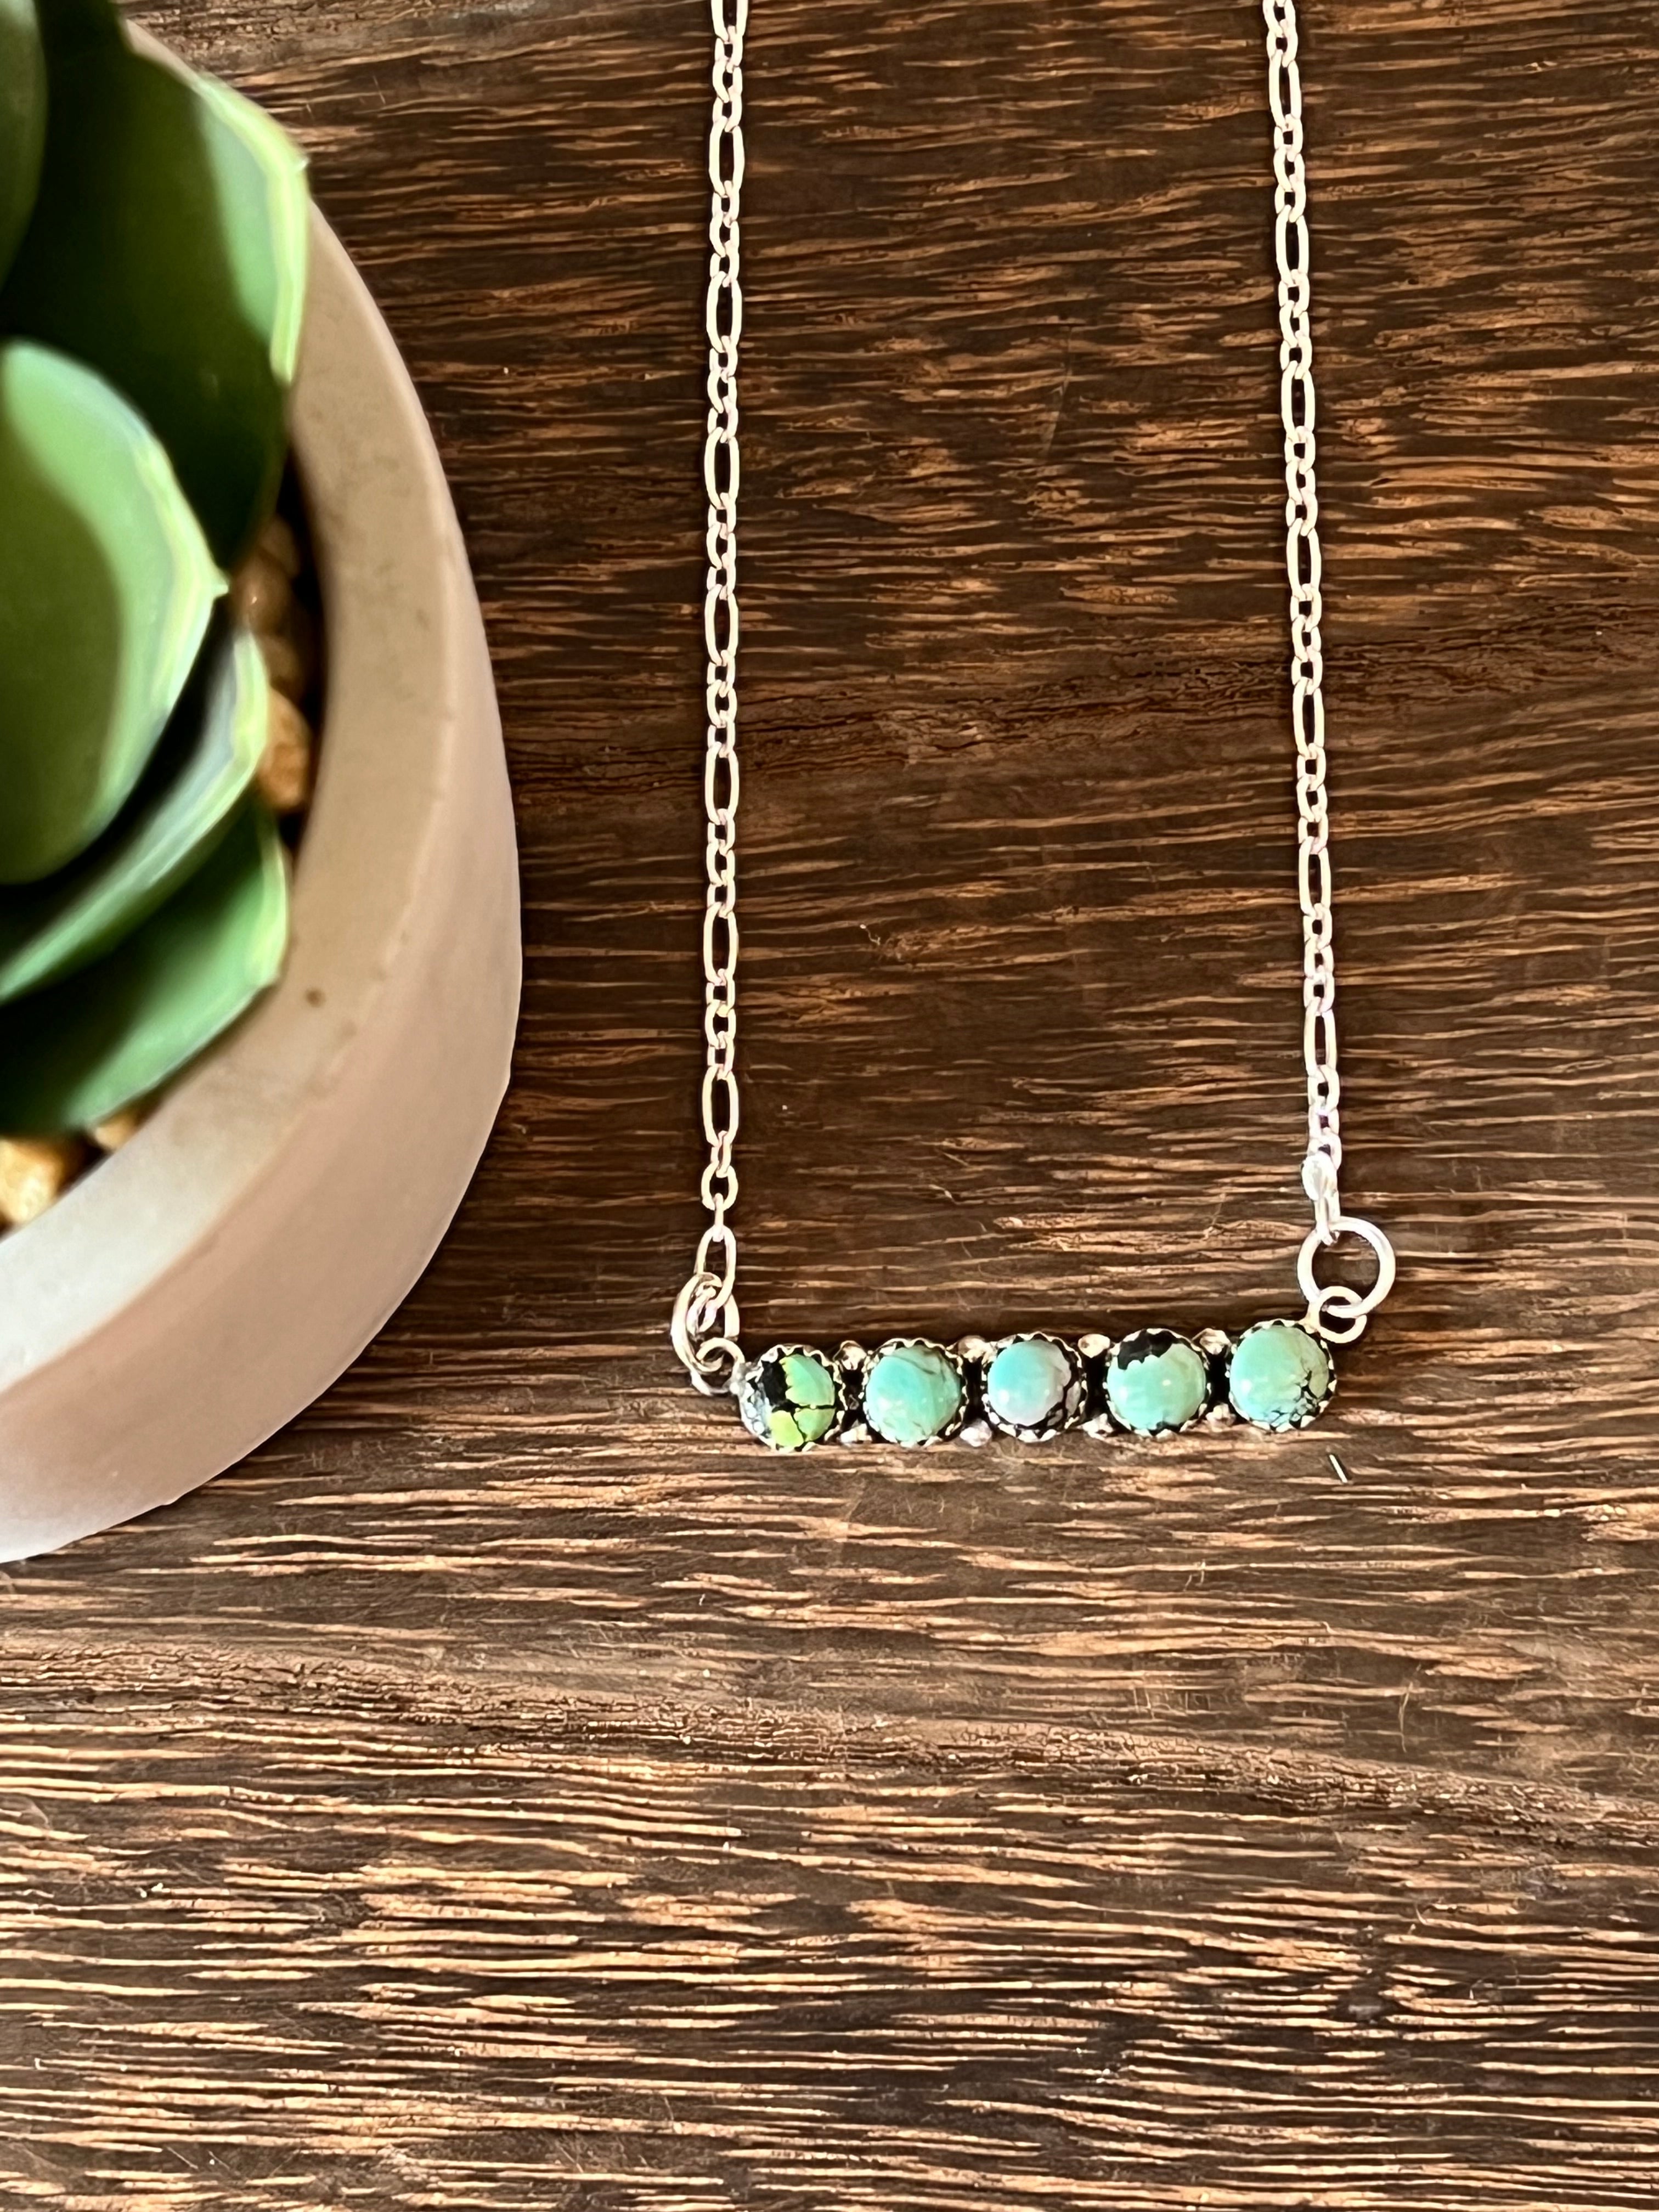 5 Stone Turquoise Sterling Silver Necklace